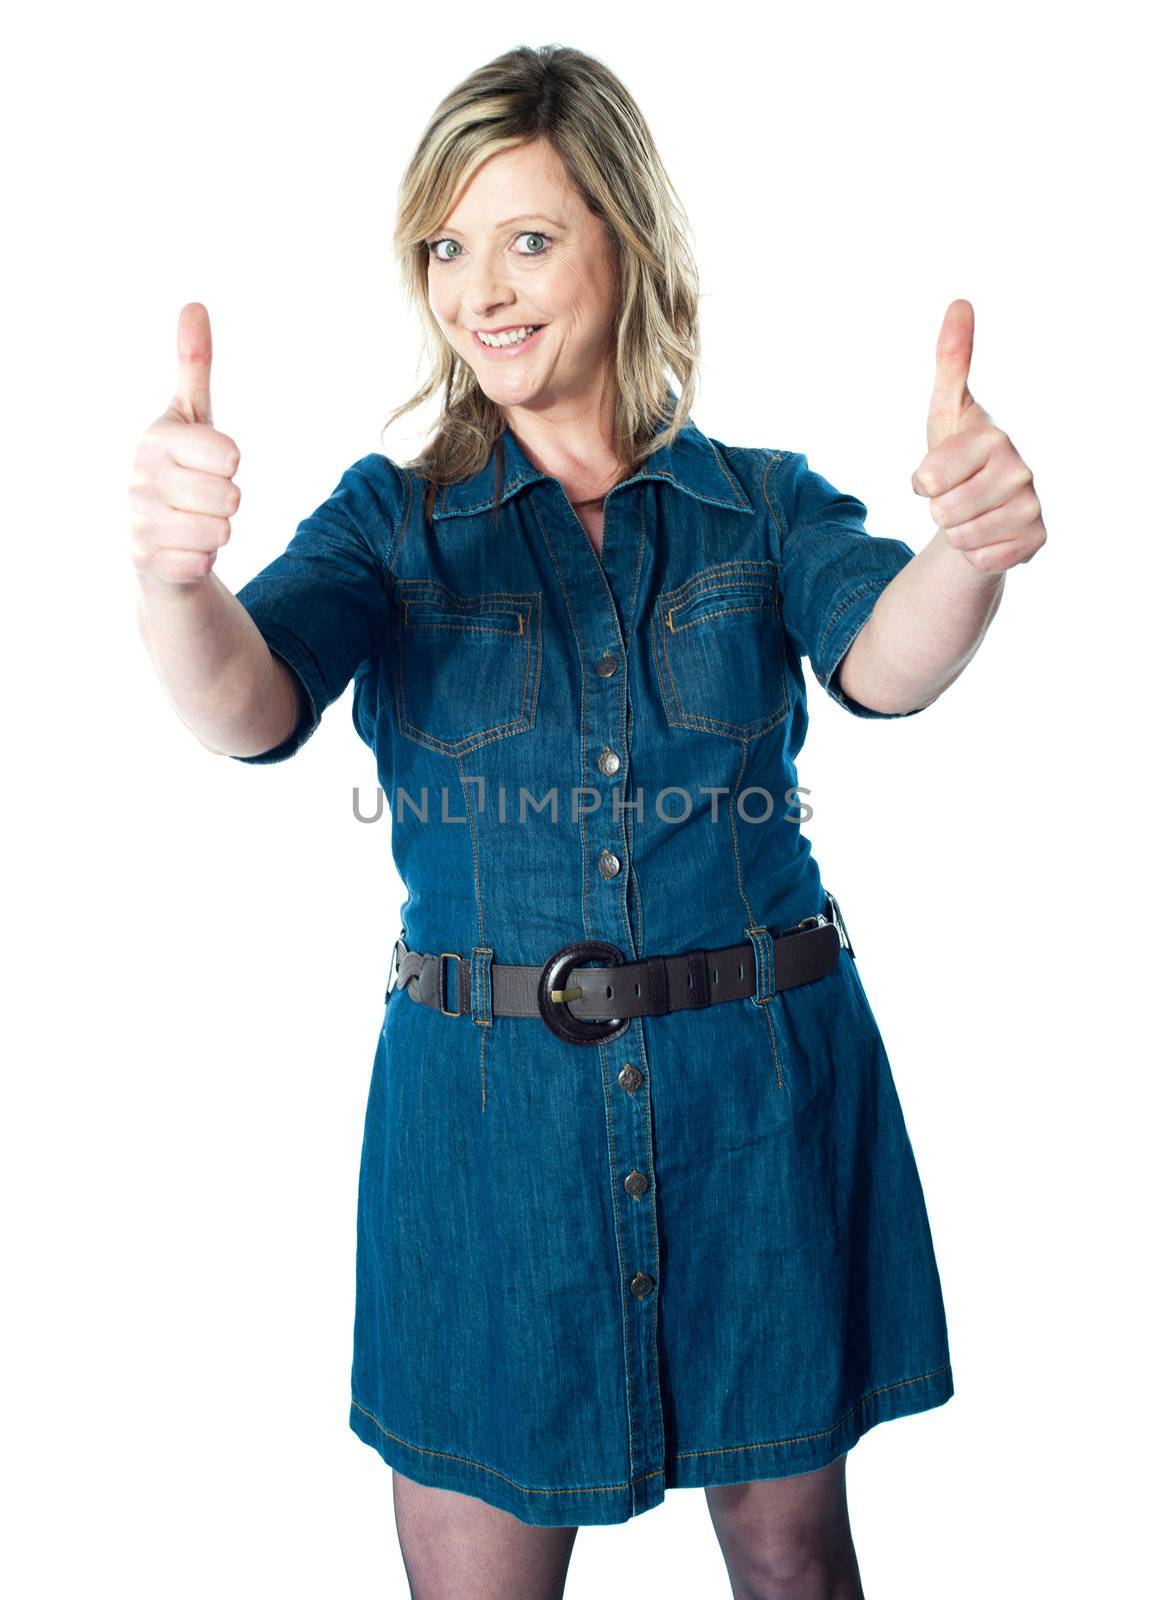 Gorgeous lady showing double thumbs-up dressed in blue attire